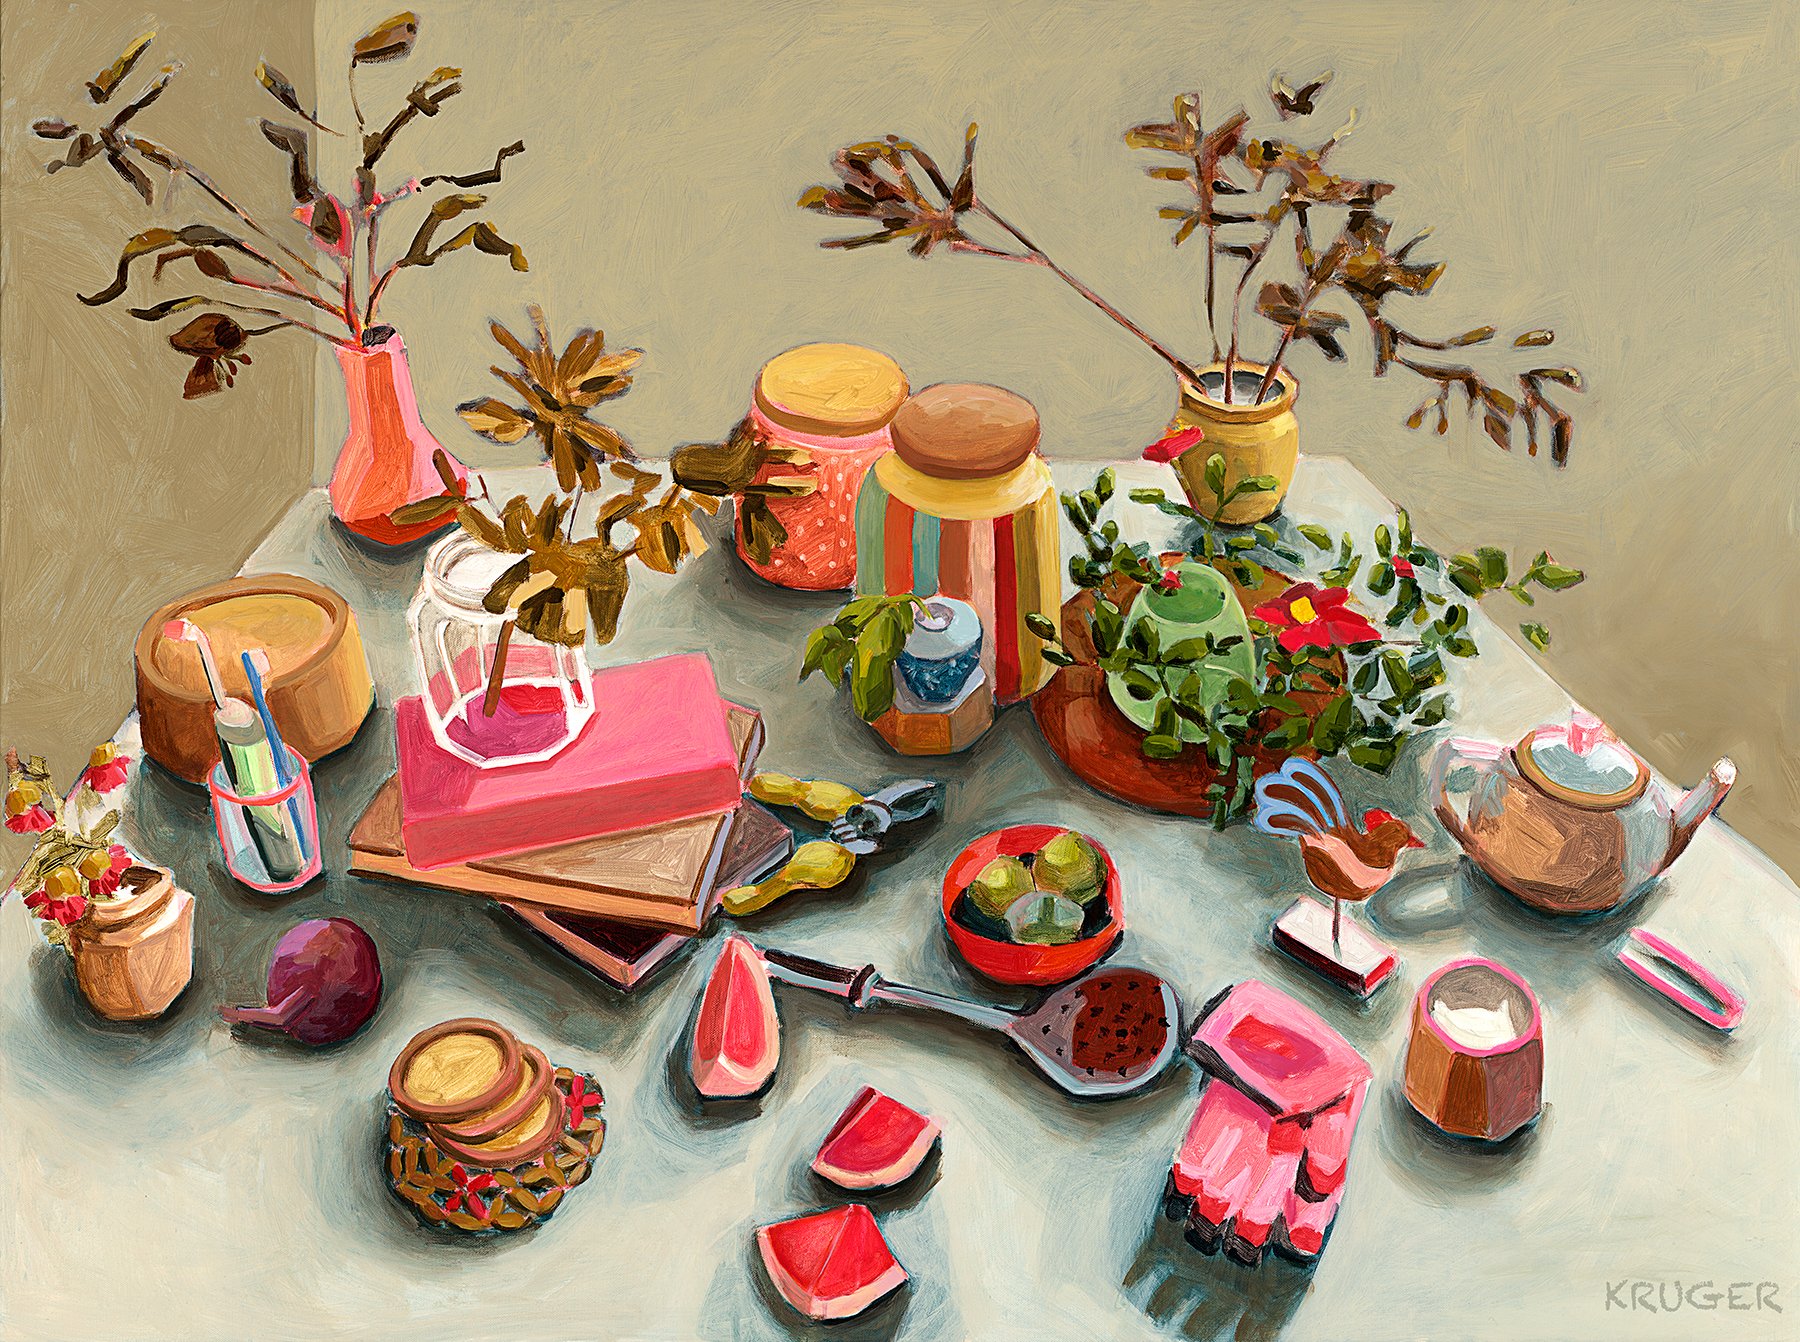 “Autumn table”, displayed as part of solo exhibition at Tweed Regional Gallery, 2022, acrylic on canvas, 94cm x 124.5cm, marked NFS for this show